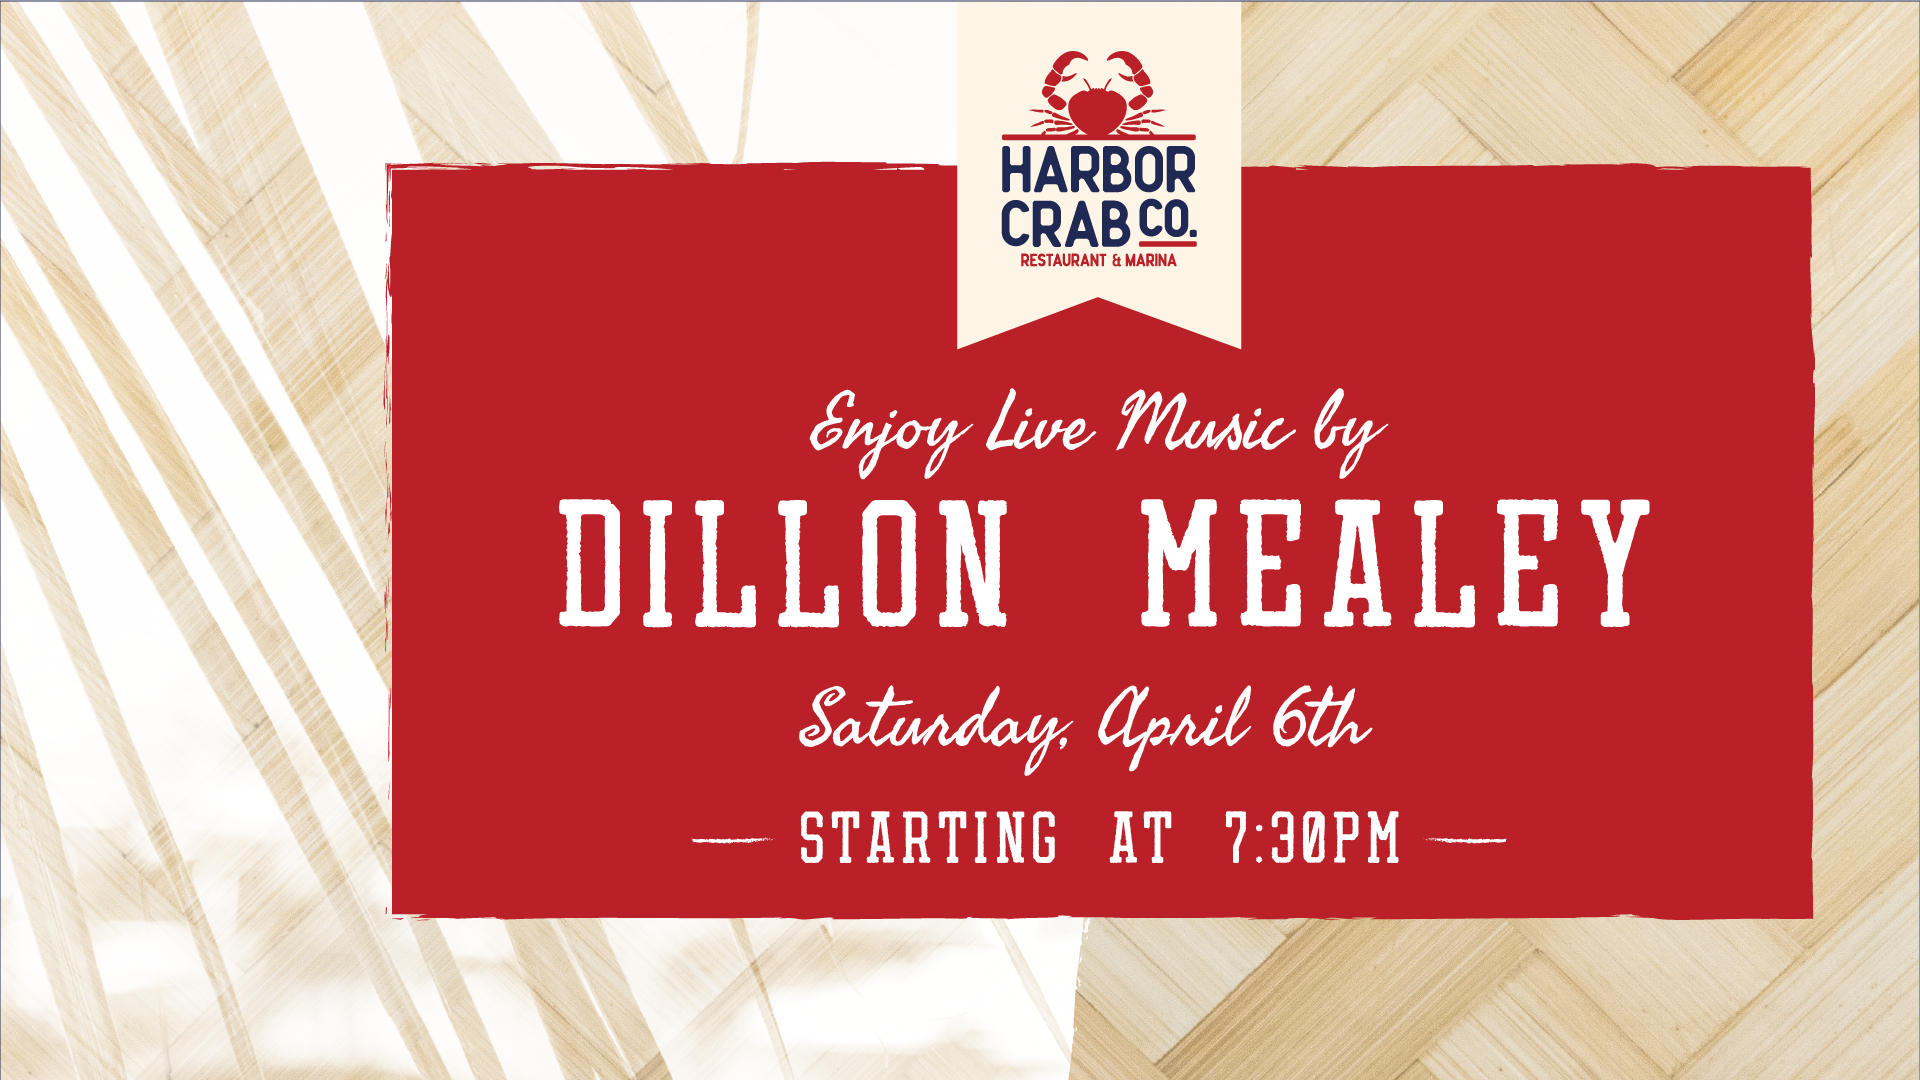 Live music by Dillon Mealey on Saturday, April 6 at 7:30PM